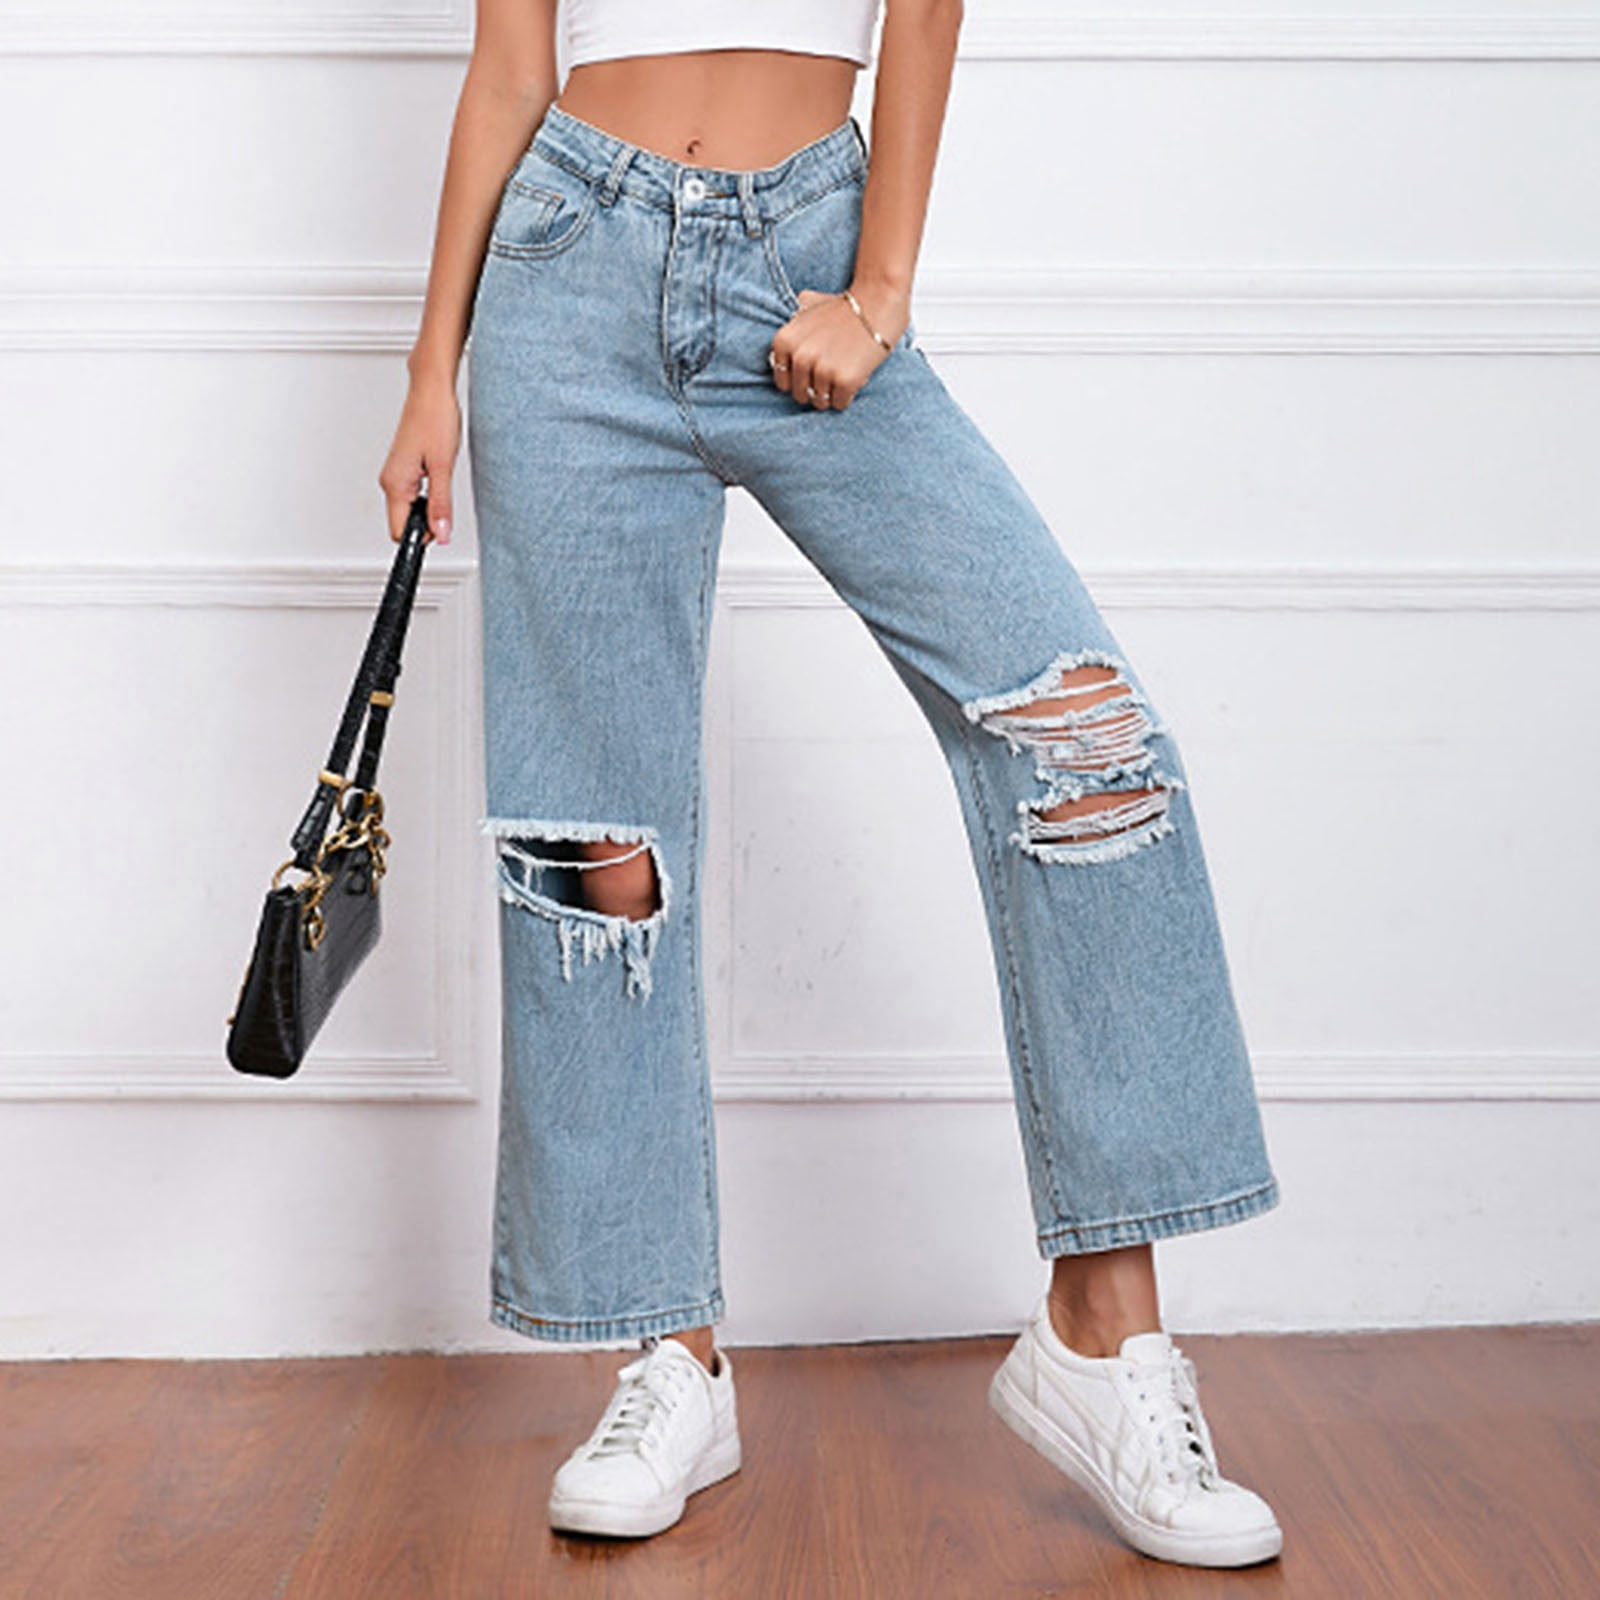 Aayomet Woman Pants Size 14 Women Stretchy High Waisted Straight Leg Ripped  Boyfriend Jeans Frayed Ankle Denim Pants,A S